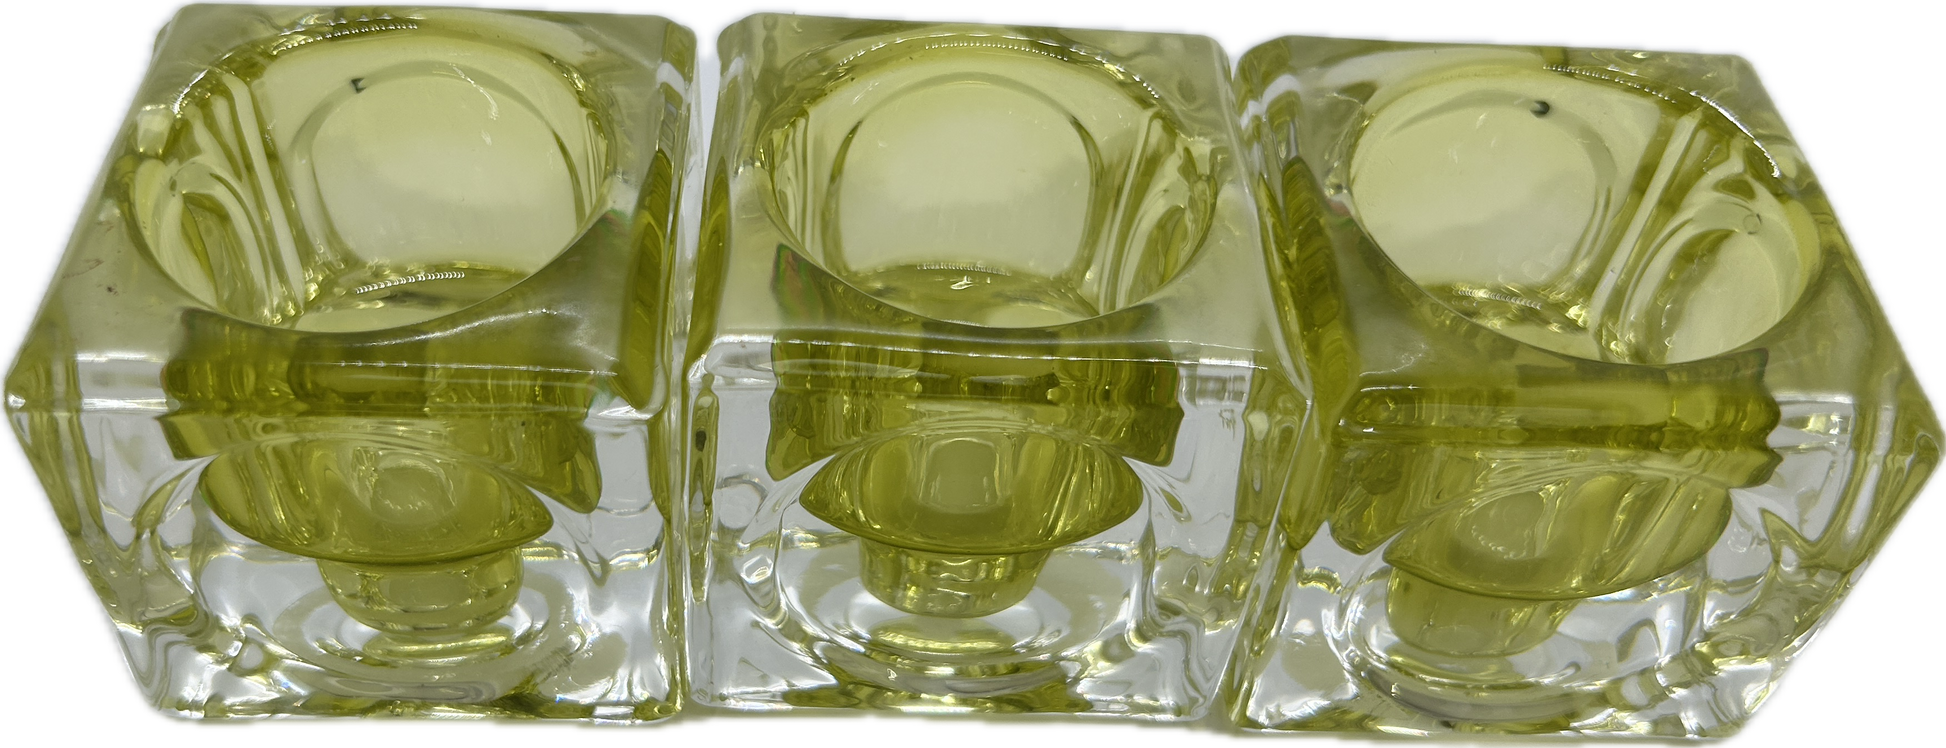 Green_square_glass_tealight_holders